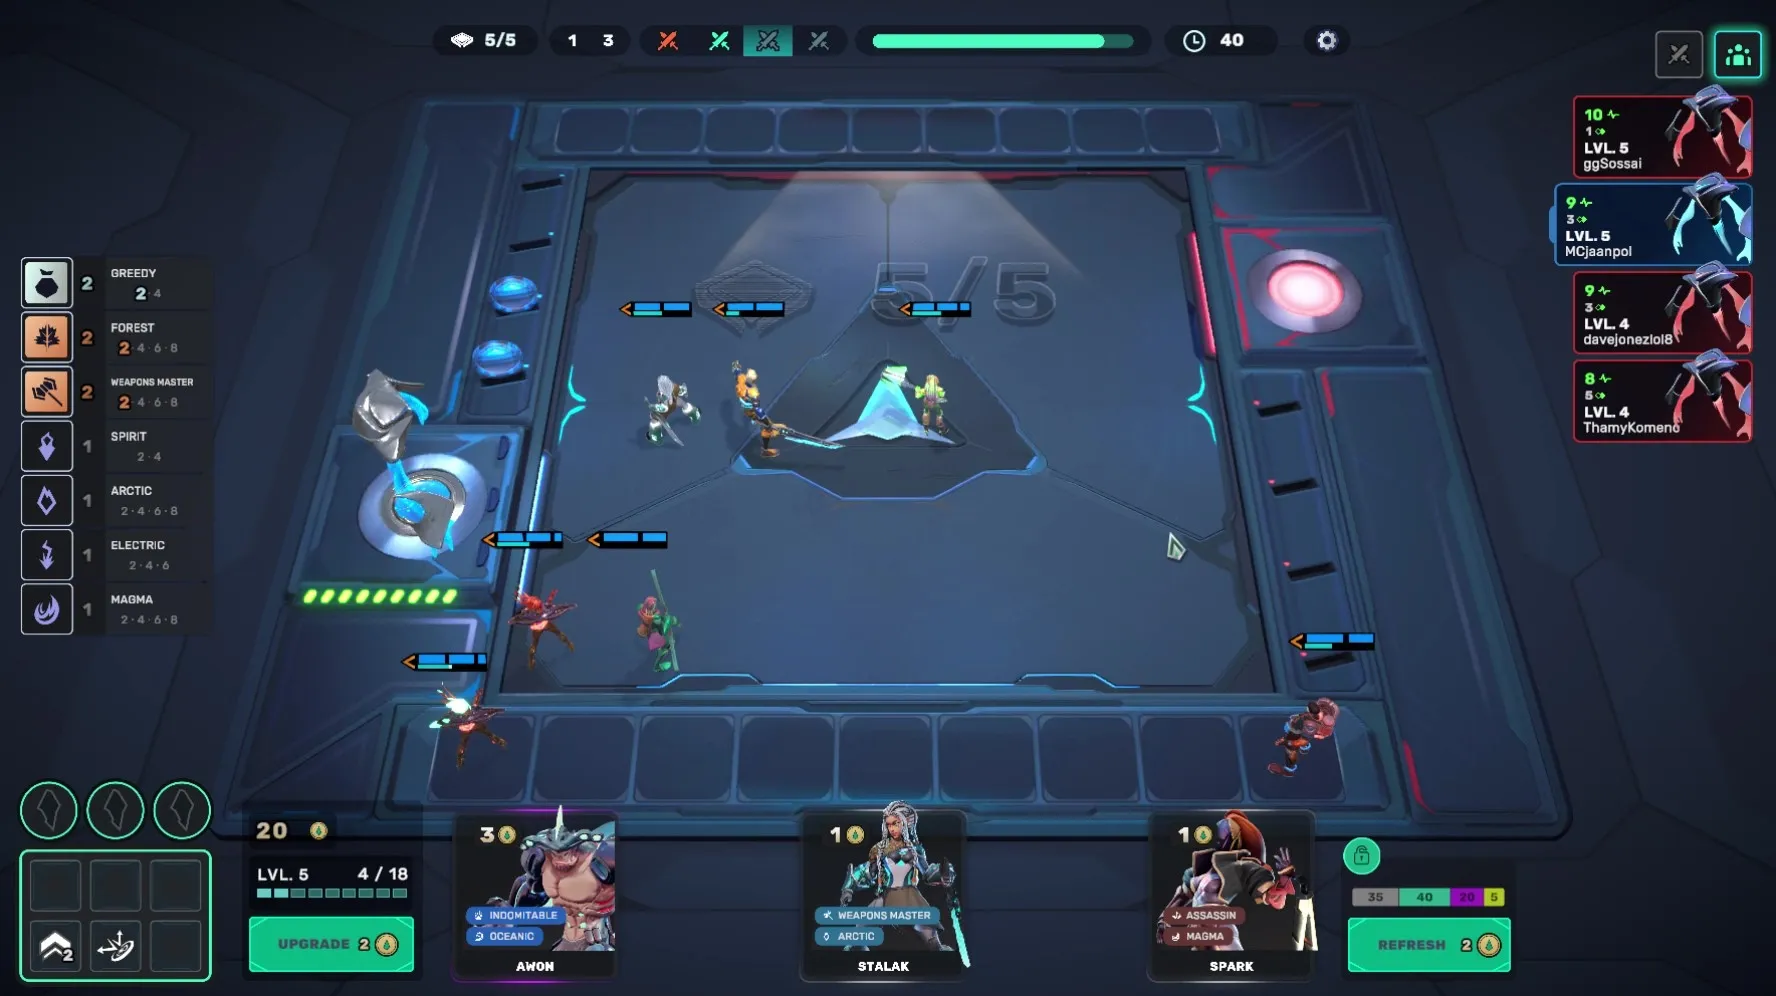 During the preparation round on Cybertitans, player will place their Titans on the board. The number of Titans you can put is determined by your level.